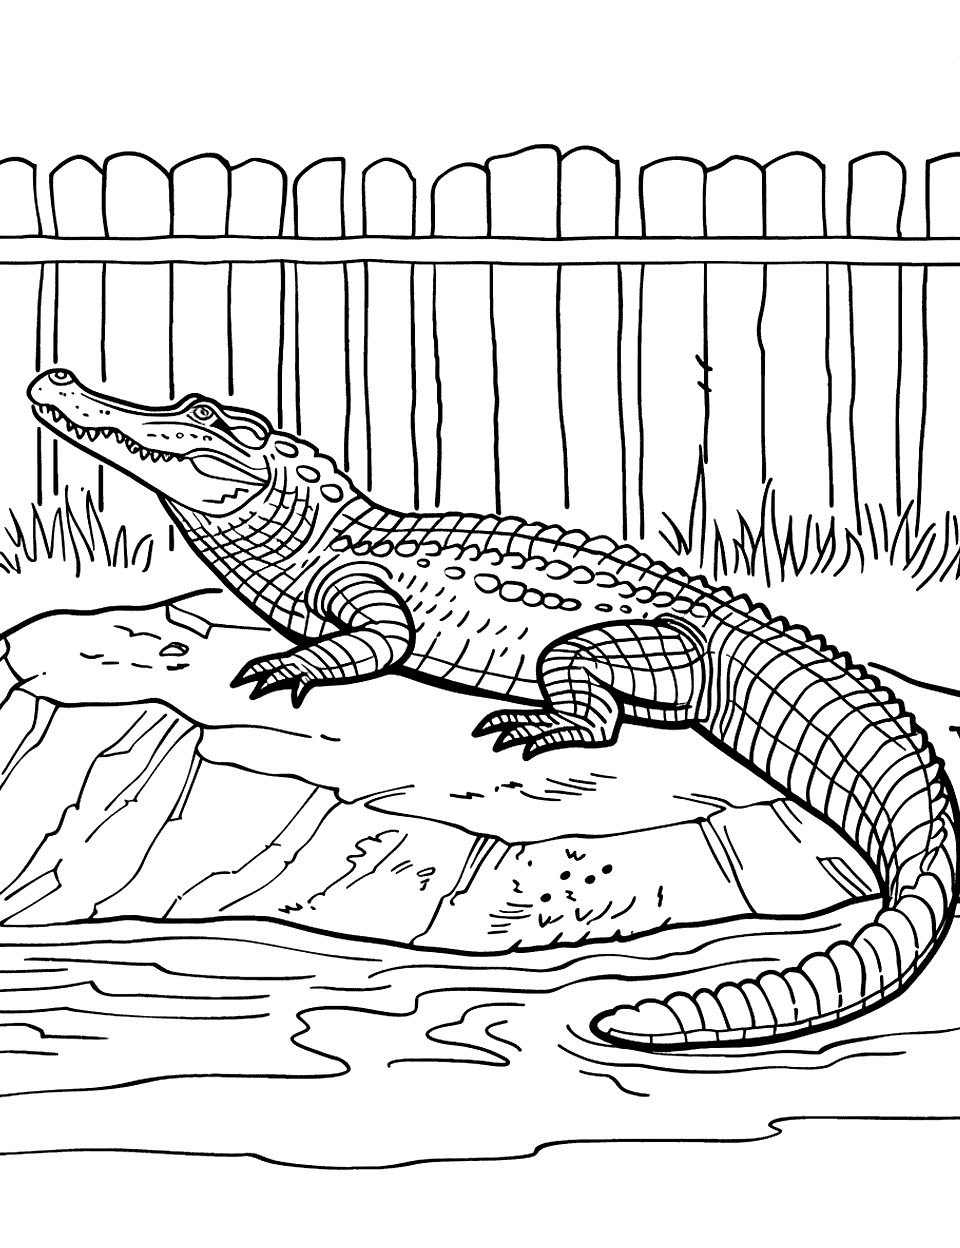 Crocodile at the Zoo Coloring Page - A large crocodile basking on a rock inside a zoo habitat with a simple fence in the background.